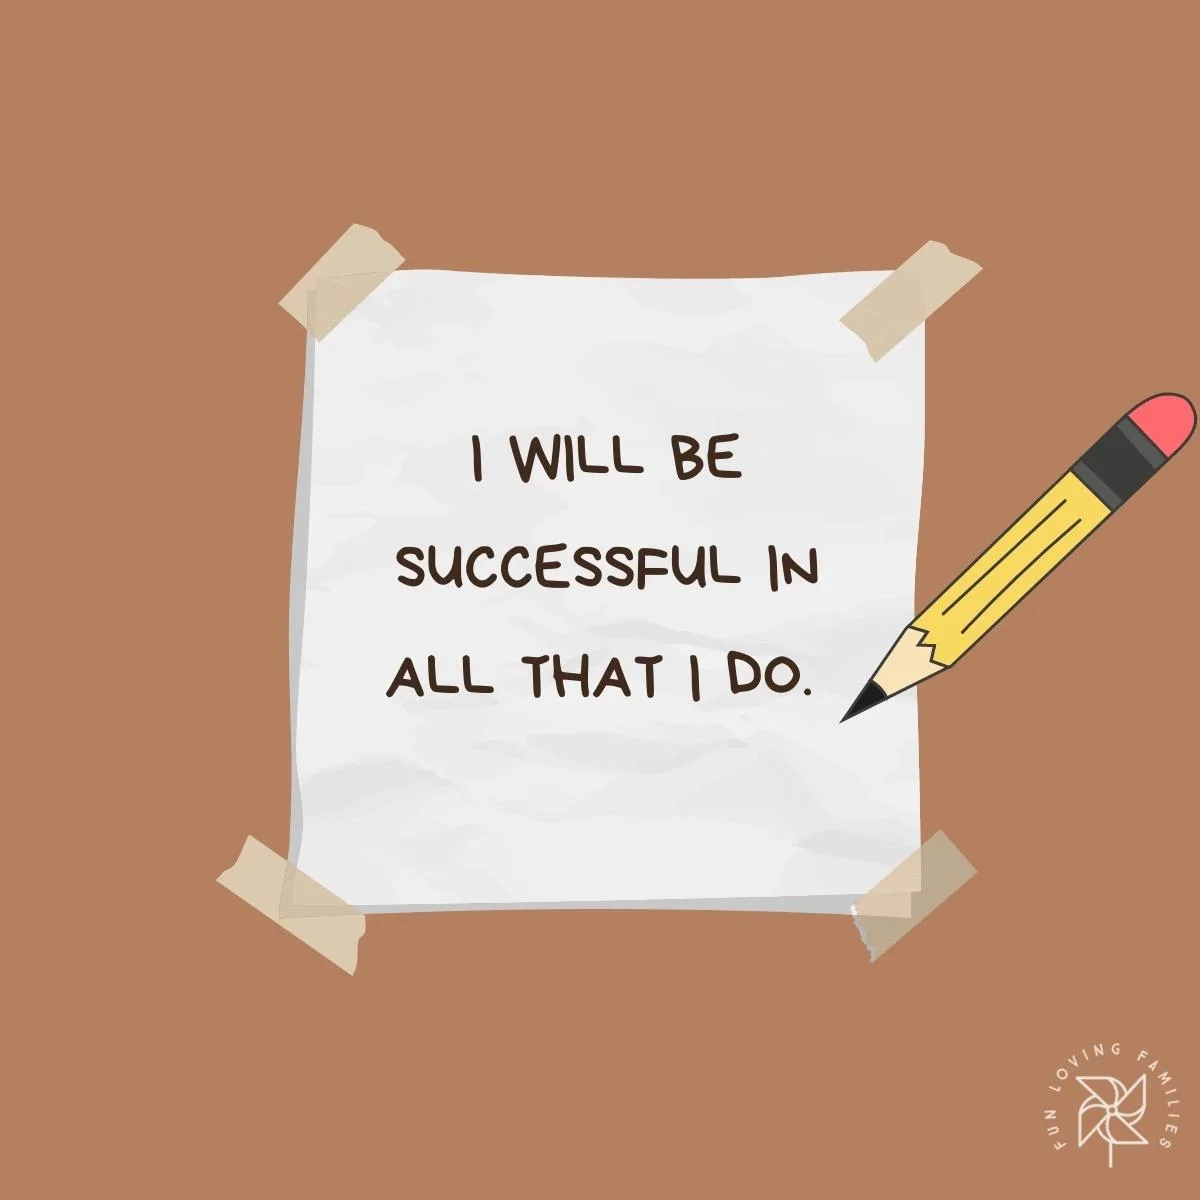 I will be successful in all that I do affirmation